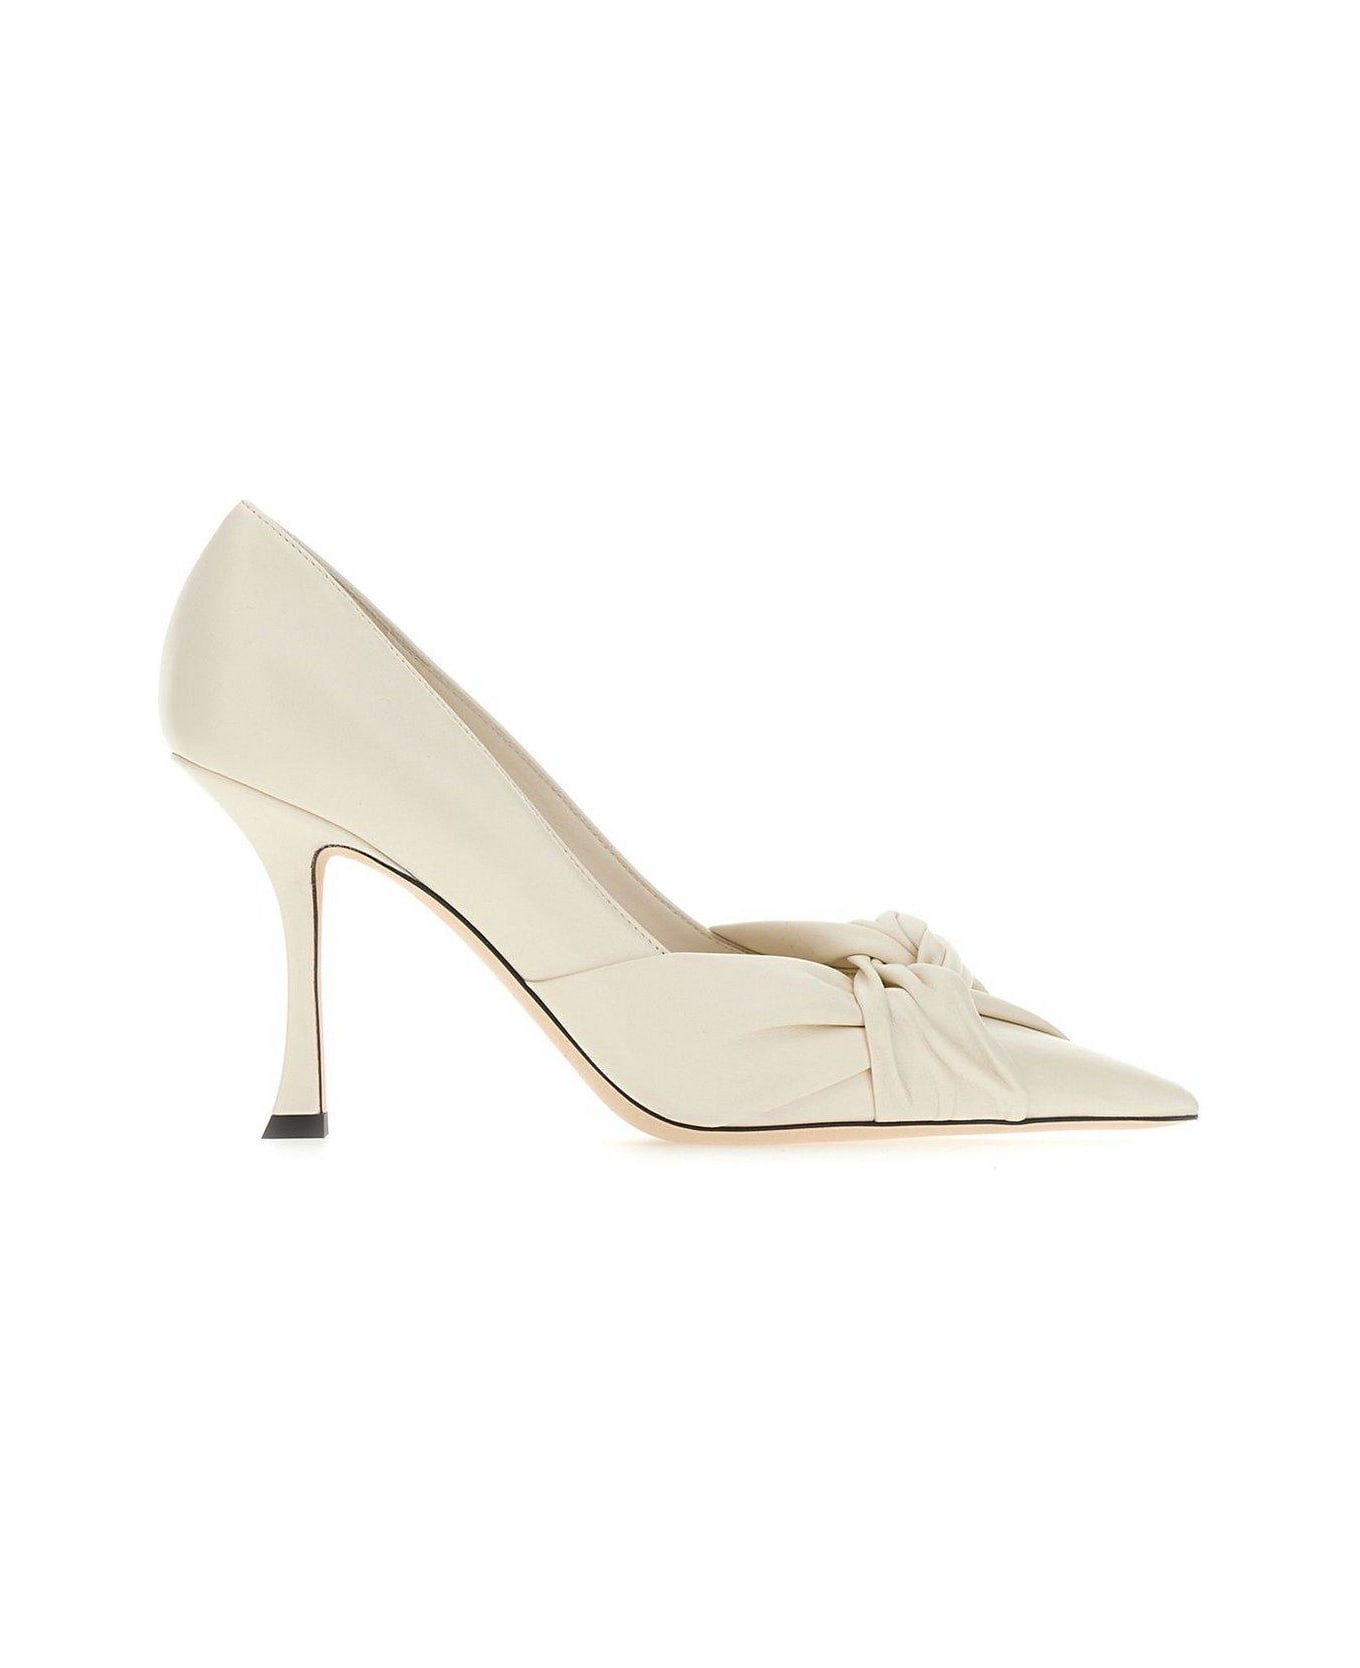 Jimmy Choo Hedera 90 Knot-detailed Pointed-toe Pumps - Milk ハイヒール